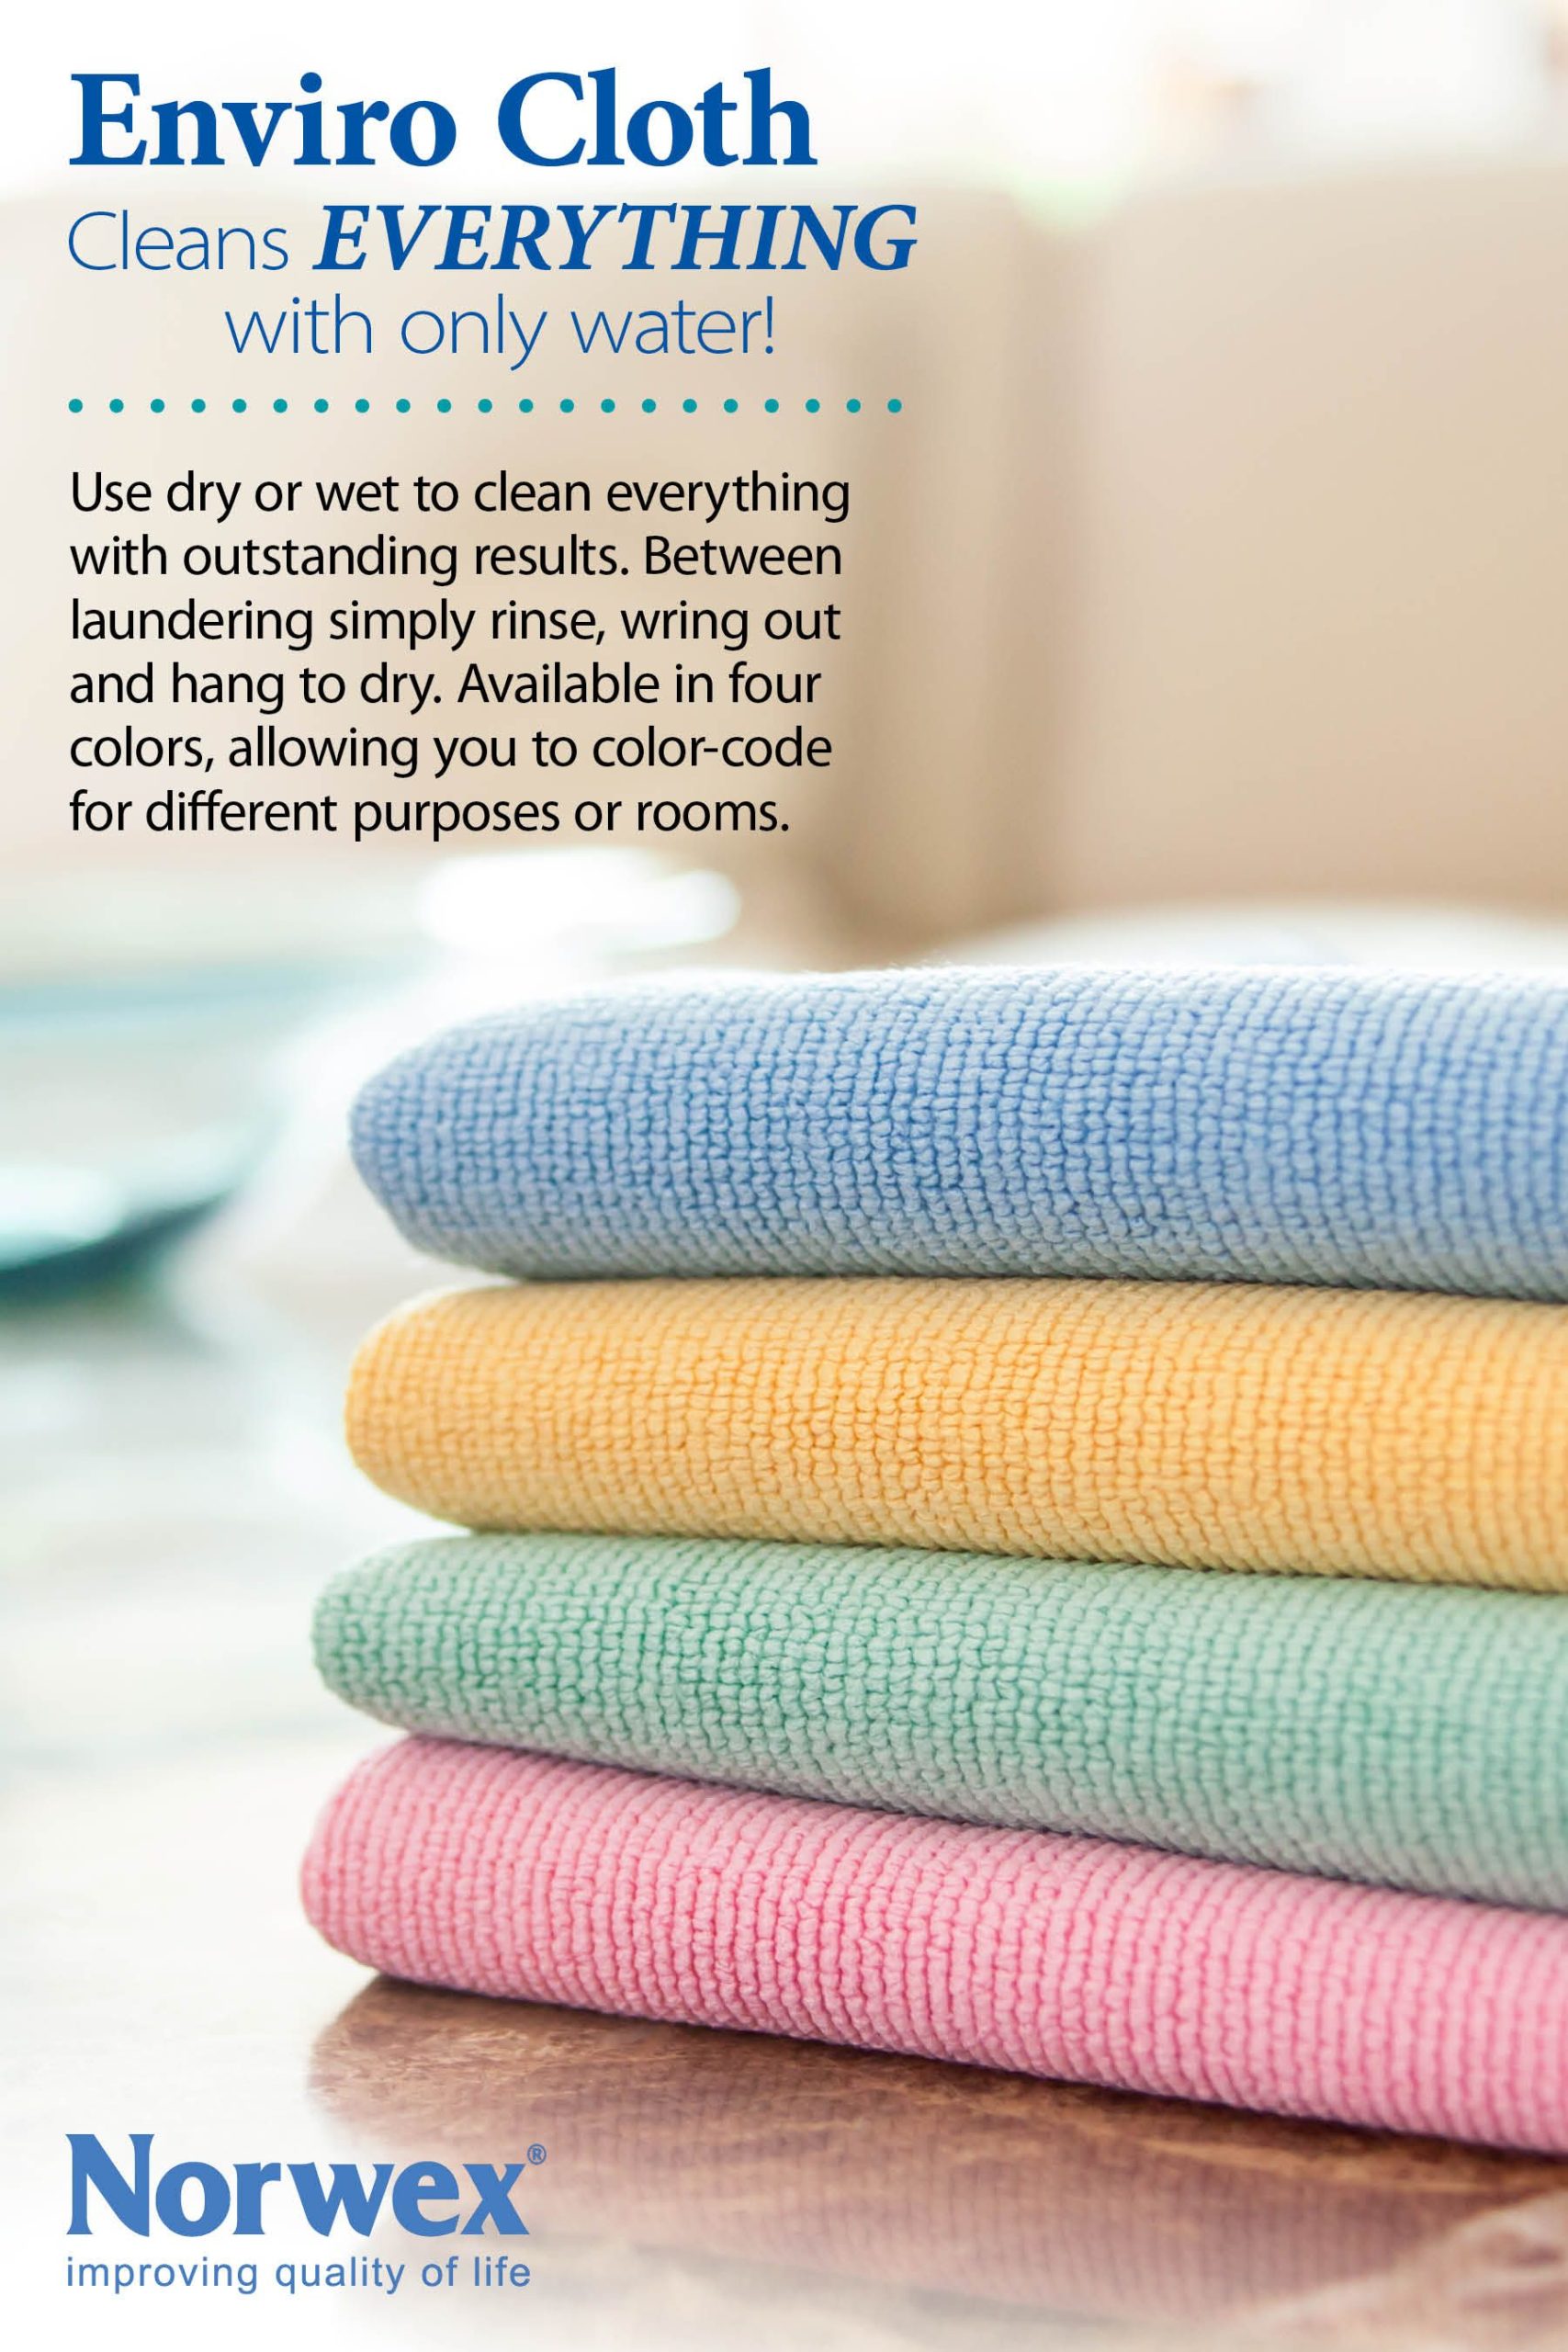 Norwex Products to Help You Live Zero Waste! - Little Green Cloth